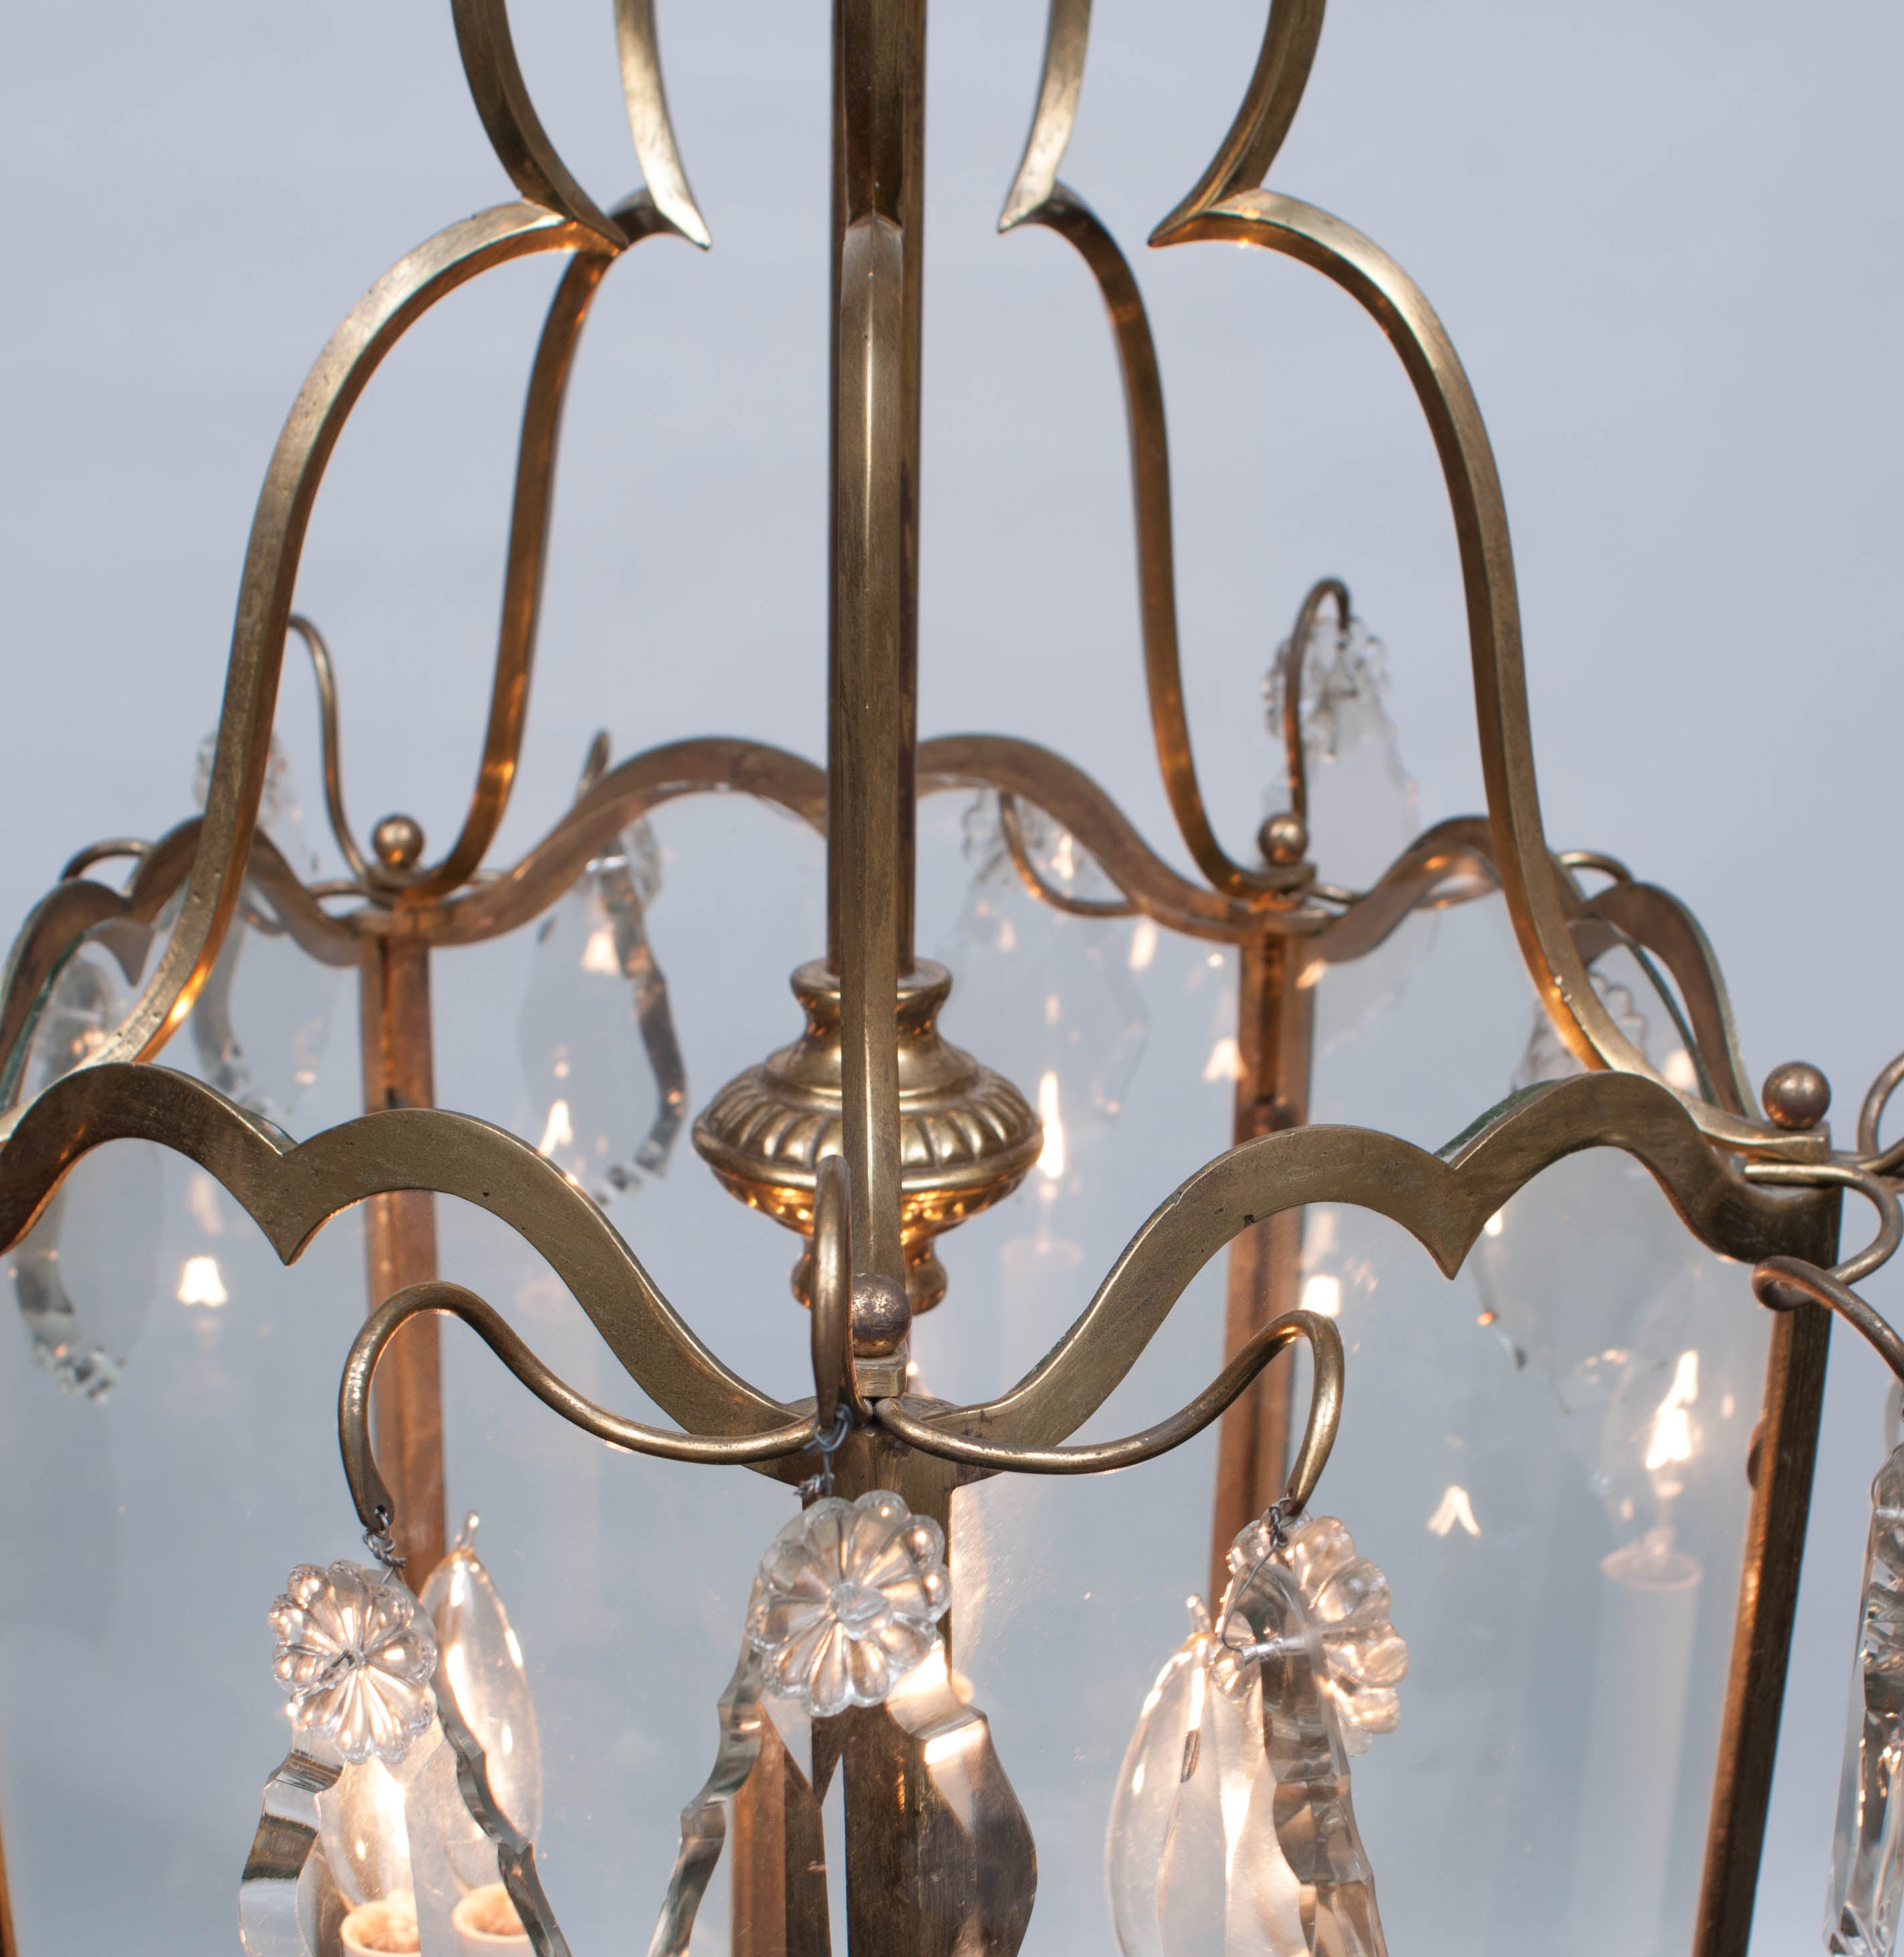 Three lights - 5-sided - lead crystal prisms - hanging hardware and appropriate ceiling cap and chain included.